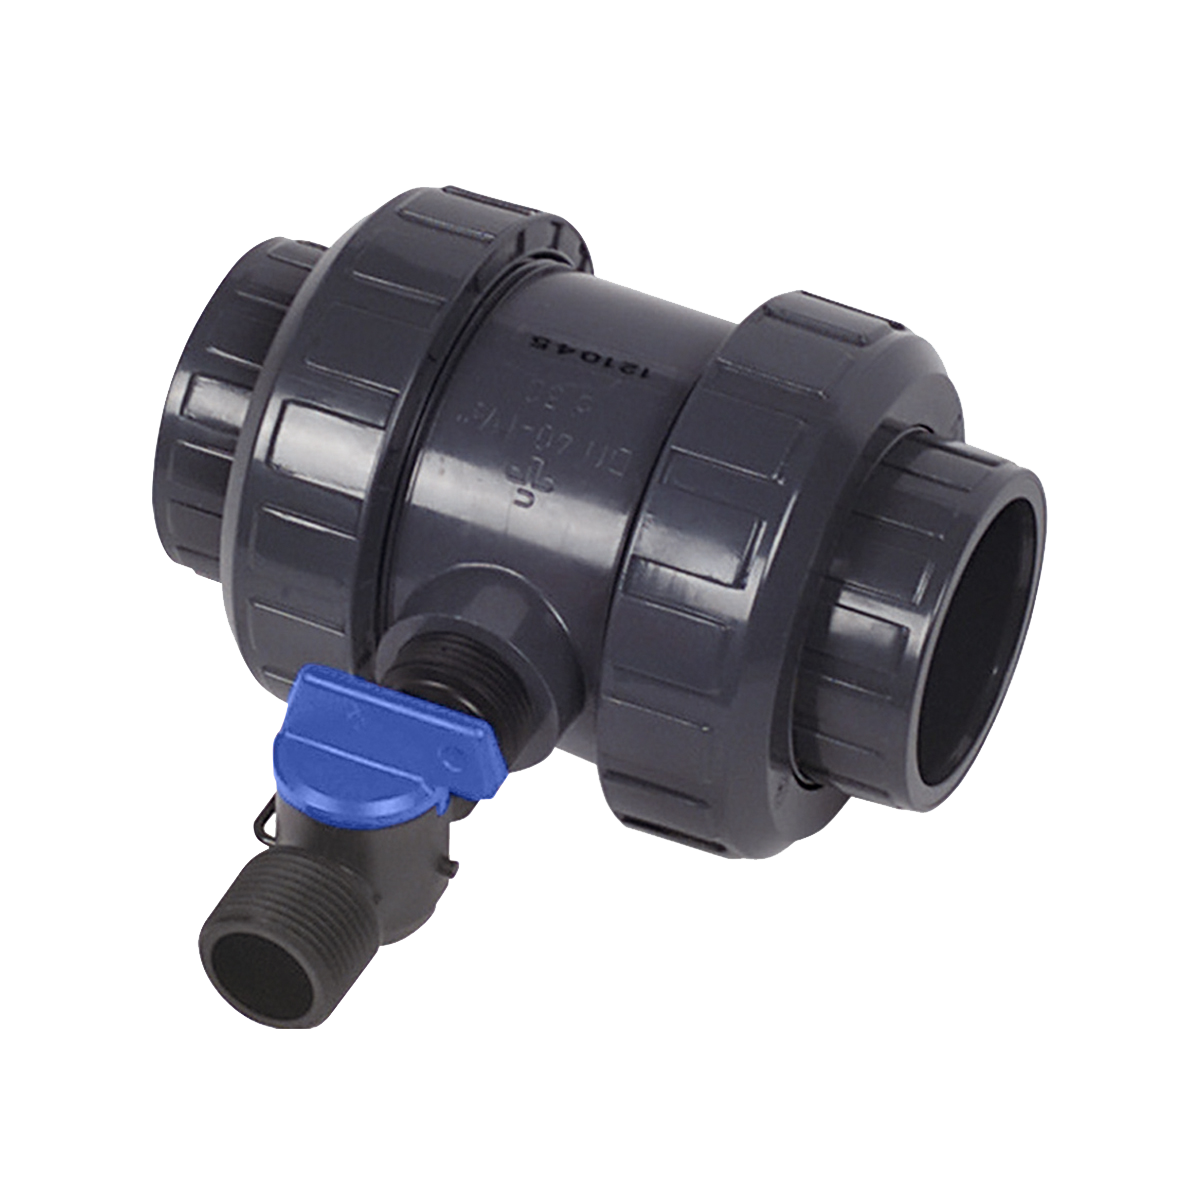 Cone Check Valve S6 with R 3/4" connection, DN32 PVC grey PVCu solvent socket ends d40 metric PN16 EPDM Cone Check Valve S6 with R 3/4" connection, DN32 PVC grey PVCu solvent socket ends d40 metric PN16 EPDM